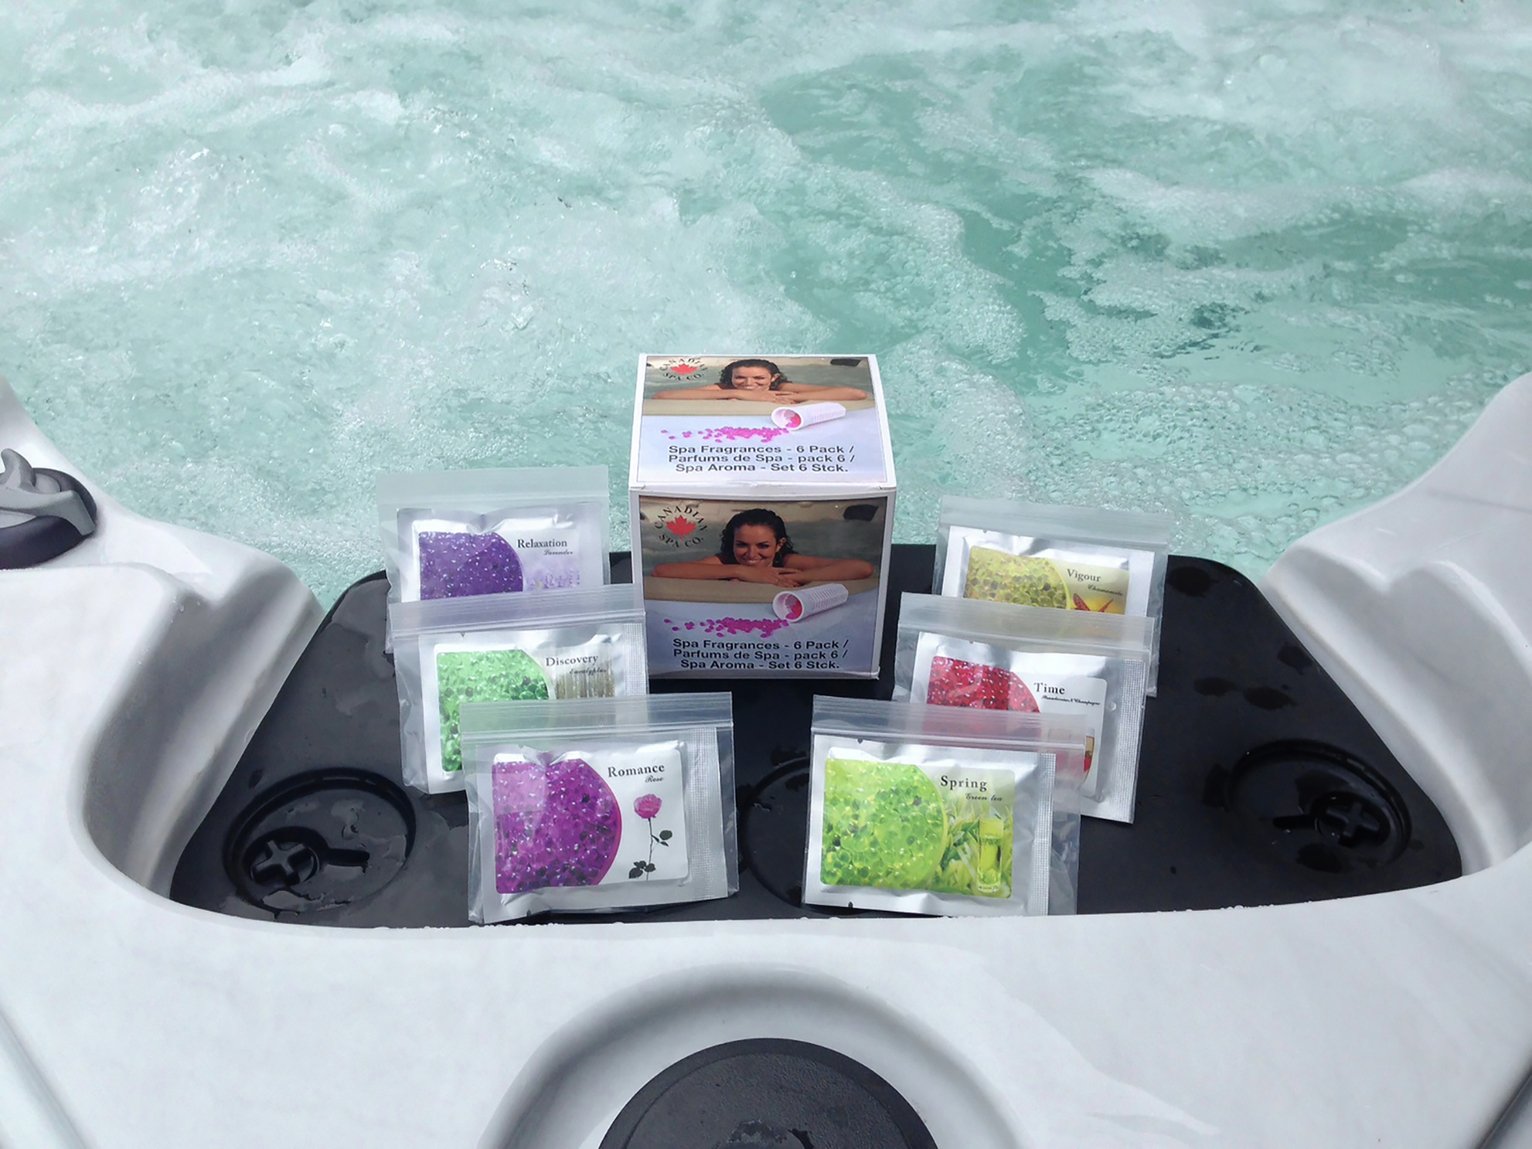 Canadian Spa Company Hot Tub Aromatherapy Spa Scents -6 pack